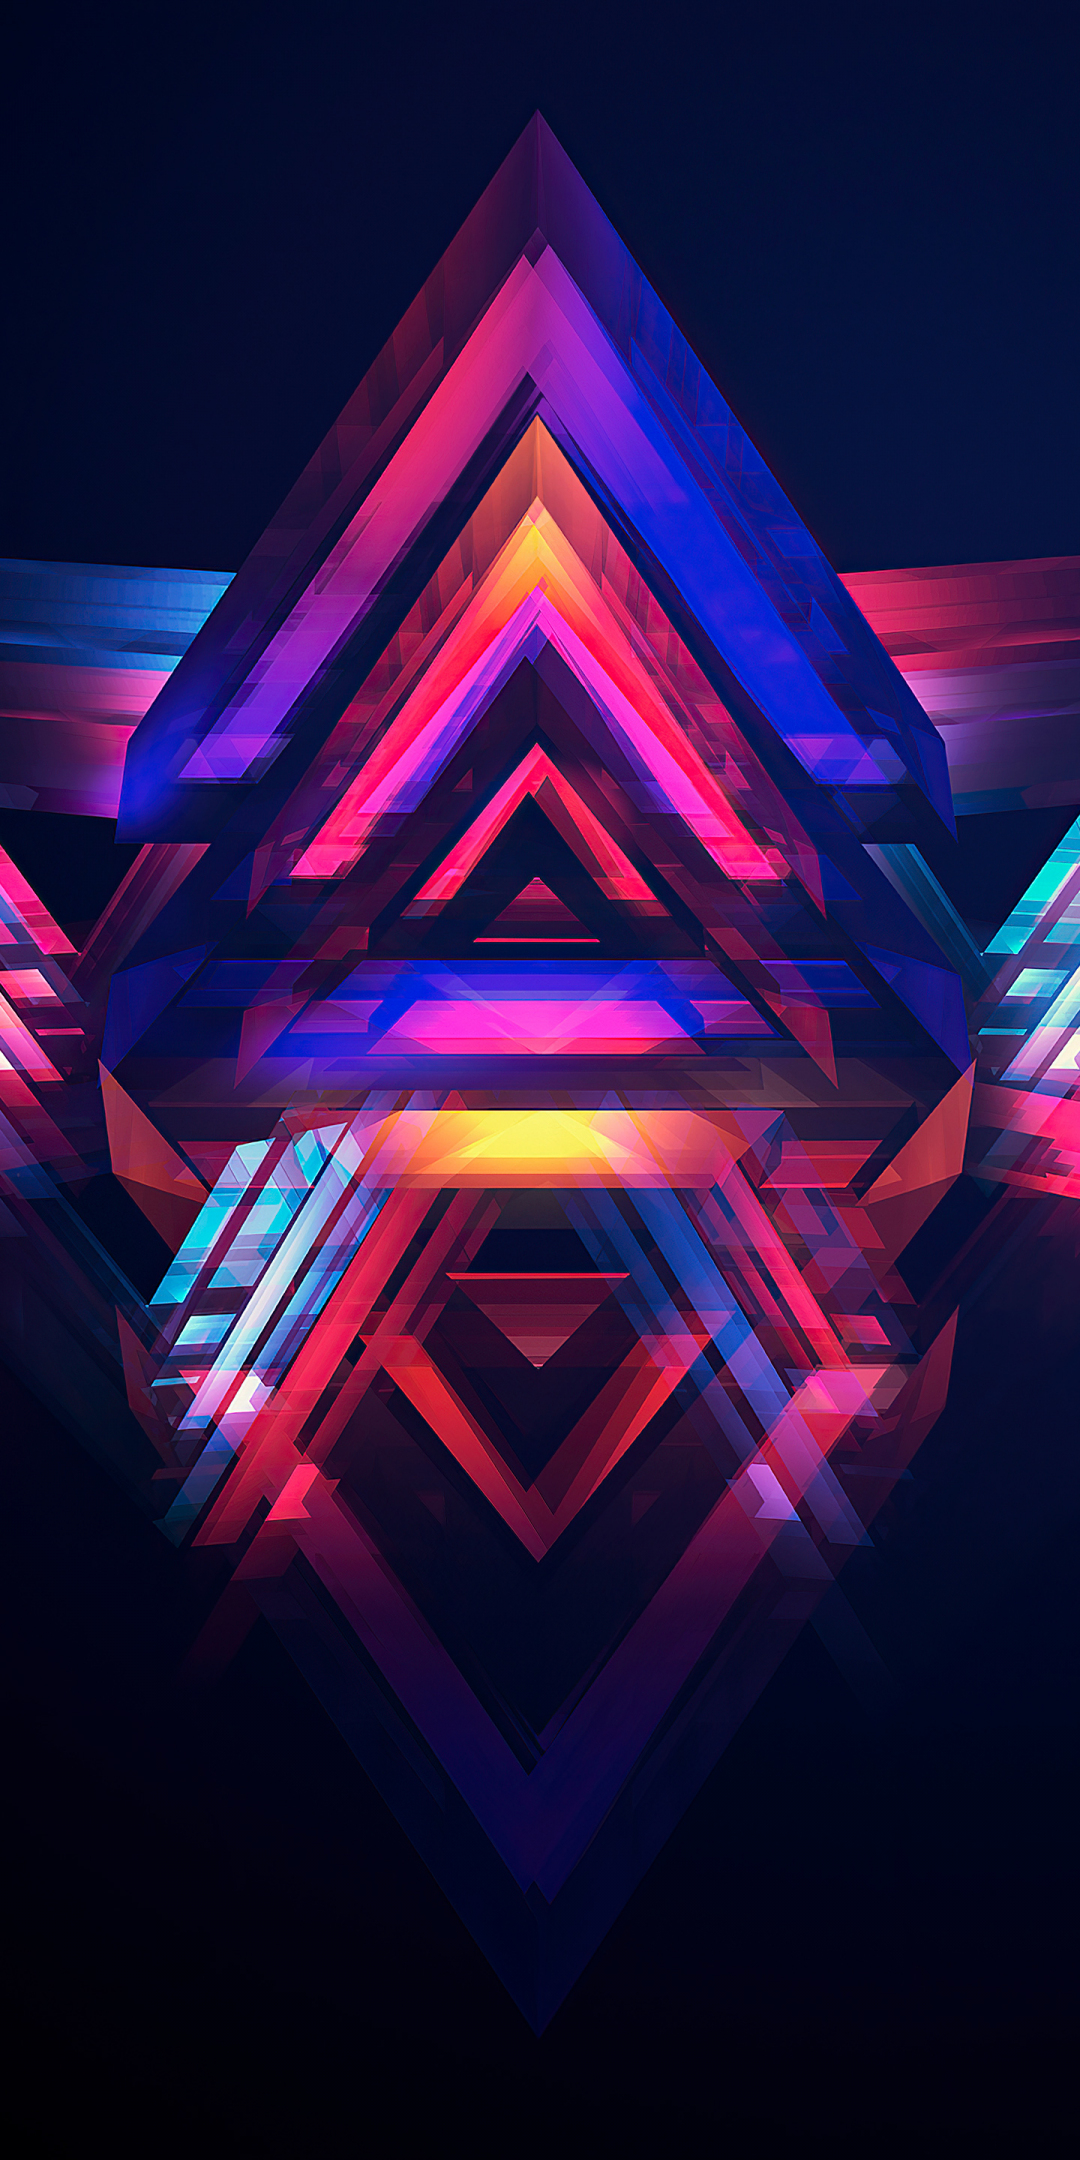 Facets, multicolored triangular shapes, abstract, 1080x2160 wallpaper